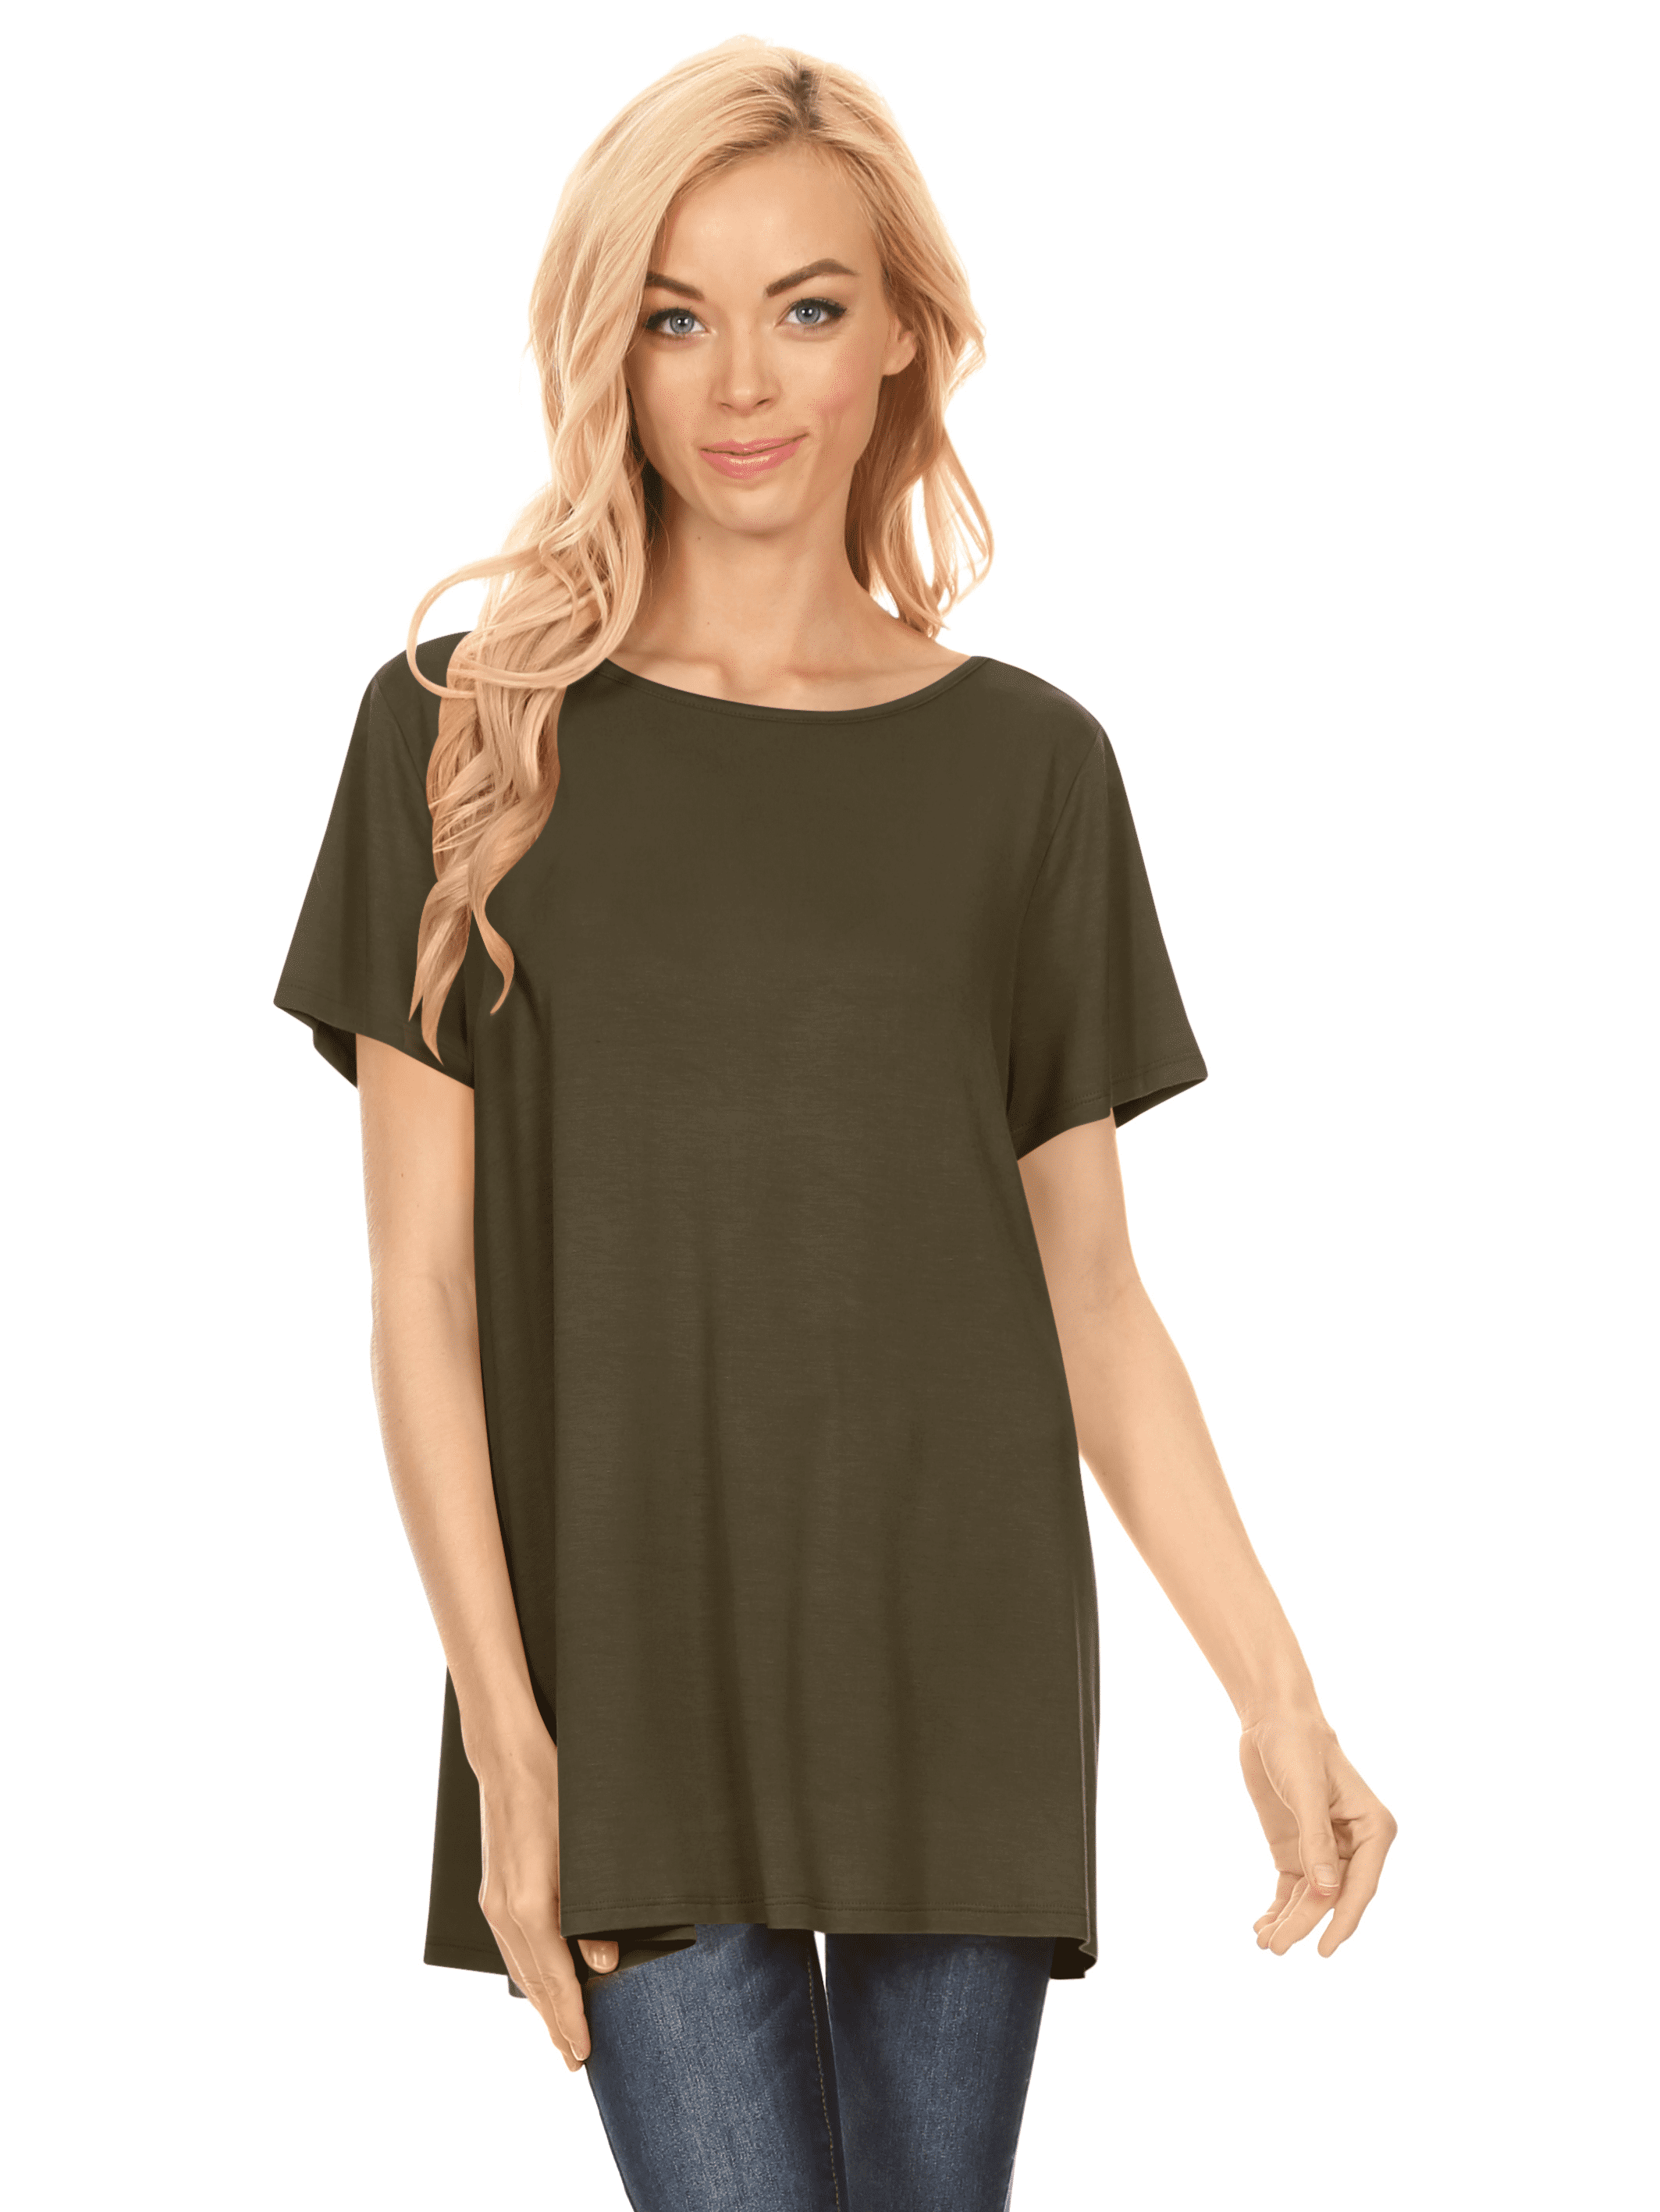 Flywake Women's Tunic Tops For Leggings Short Sleeve Shirts Botton Up  Casual Ruched Blouses Clothes 